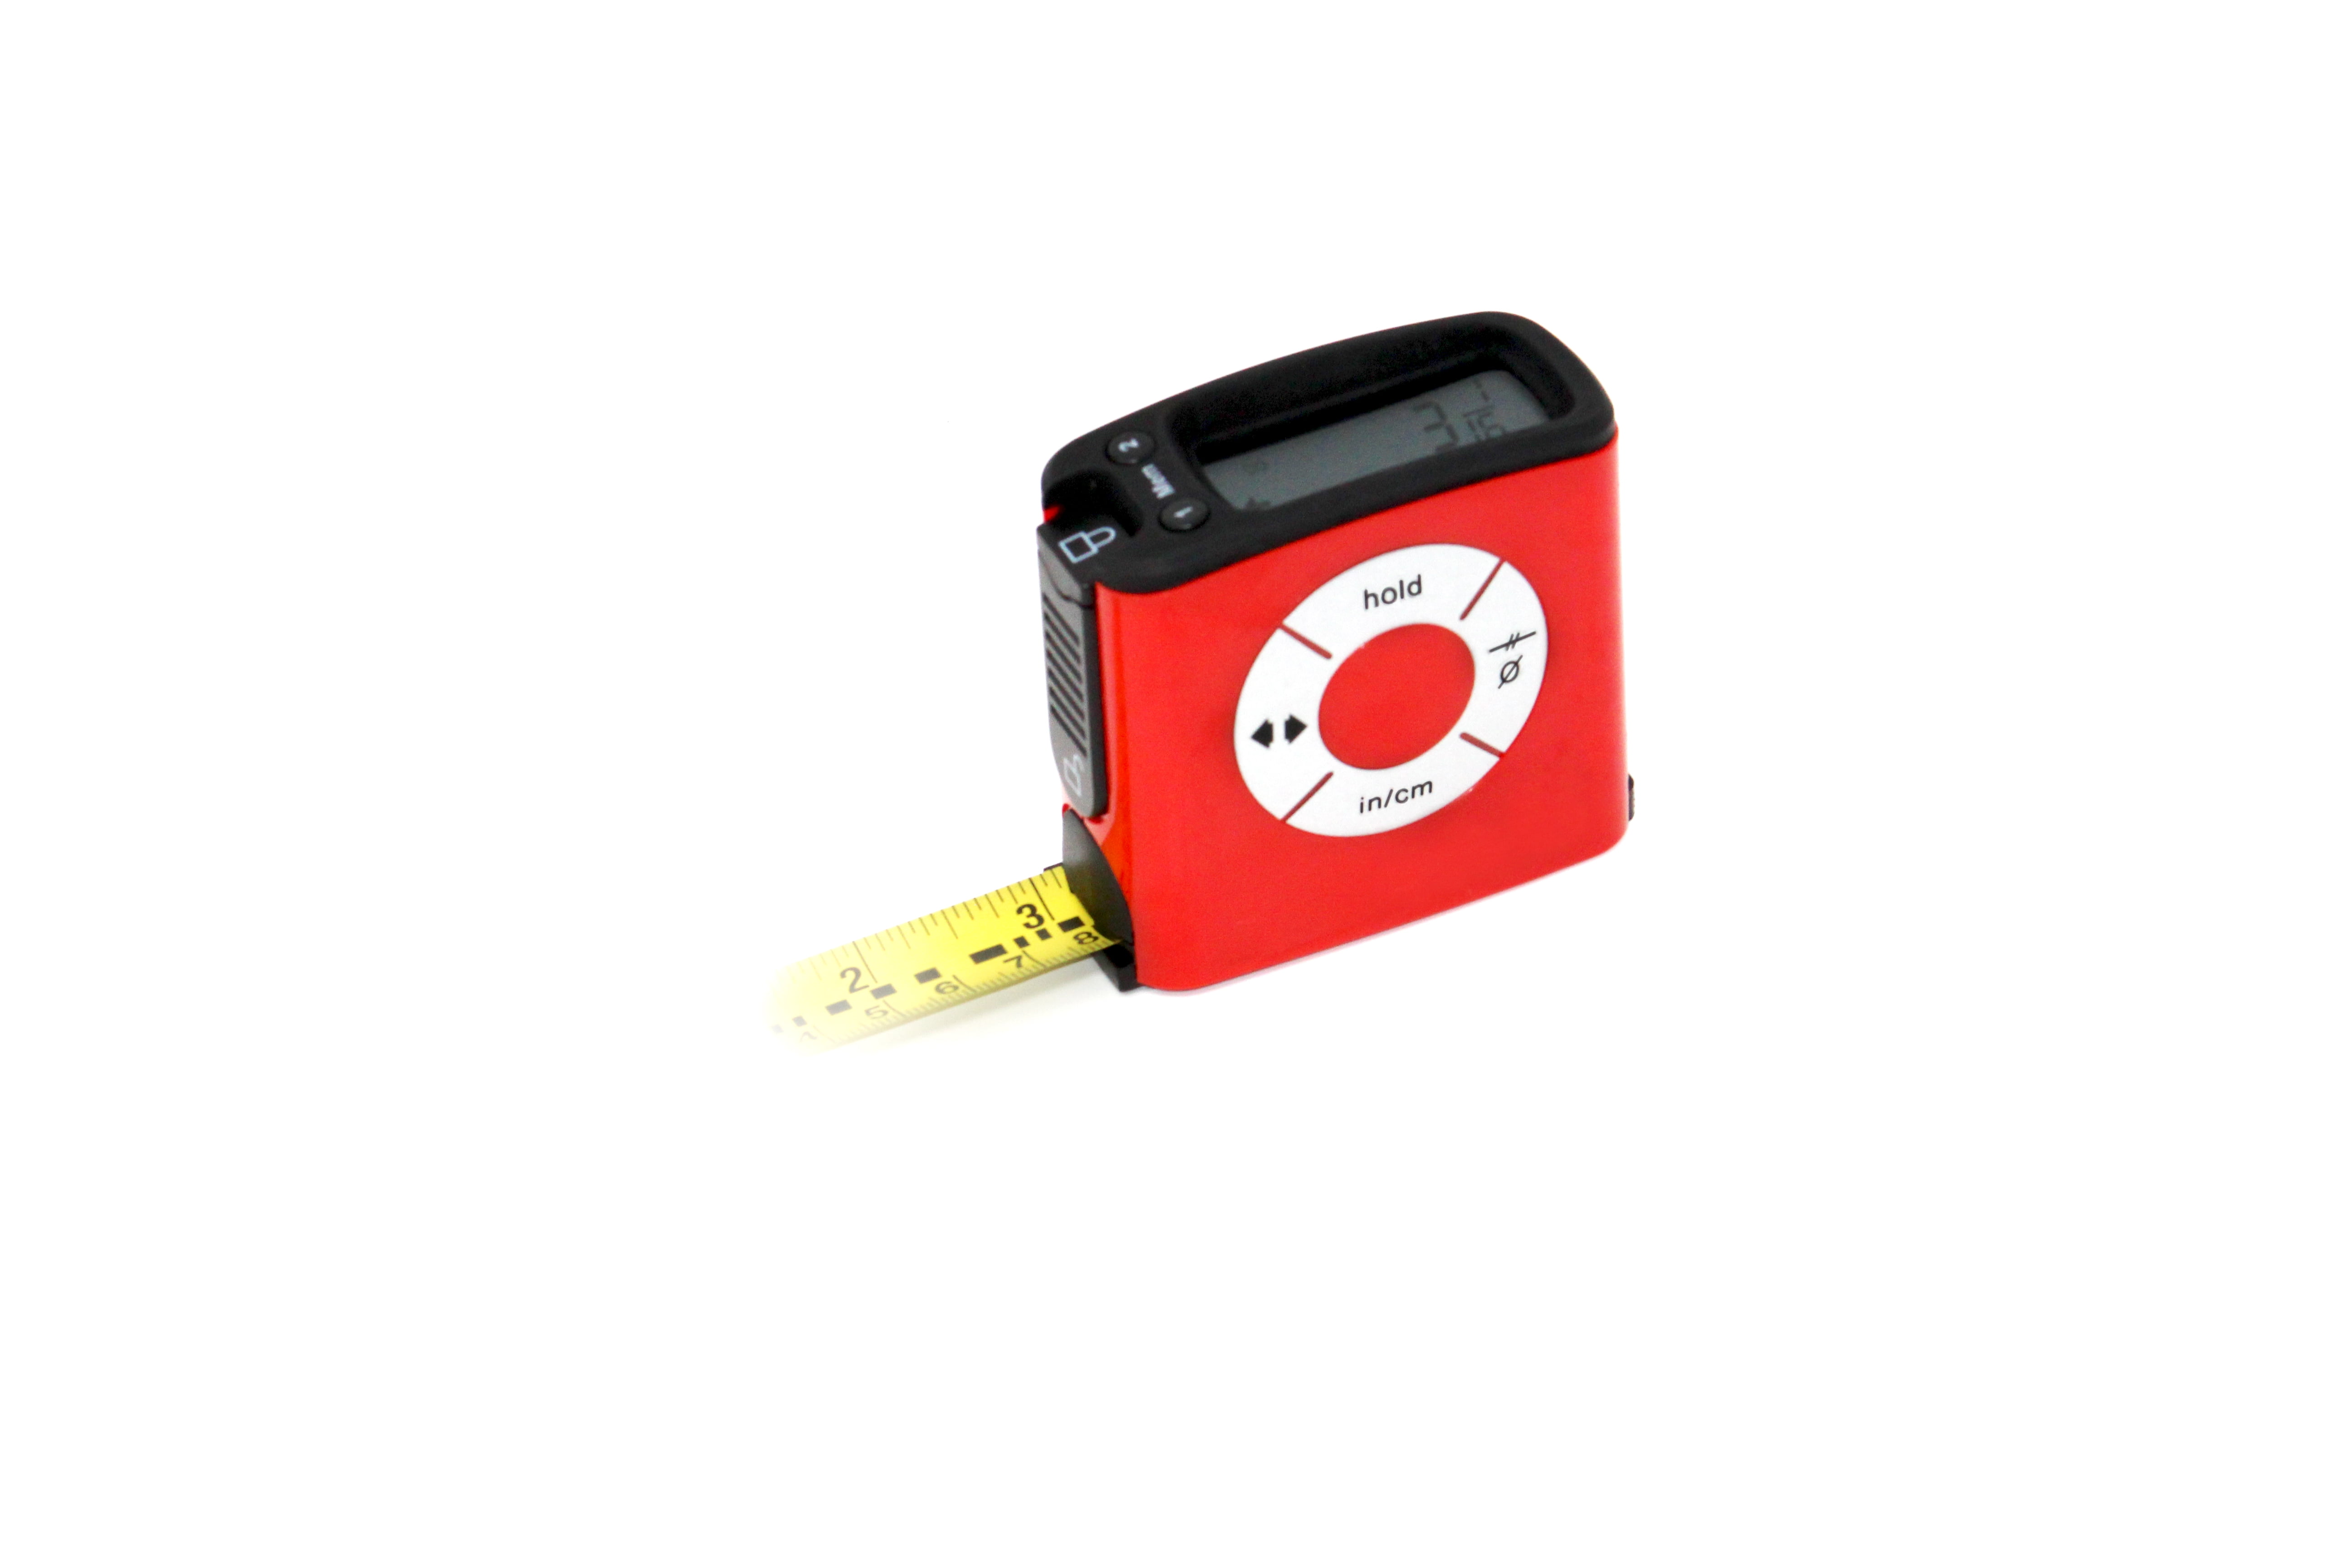 DigitalTape Measure,Locking Retractable Auto-Wind Measuring Tapes with Fractions Easy to Read & EASY TO FIND! Accurate 